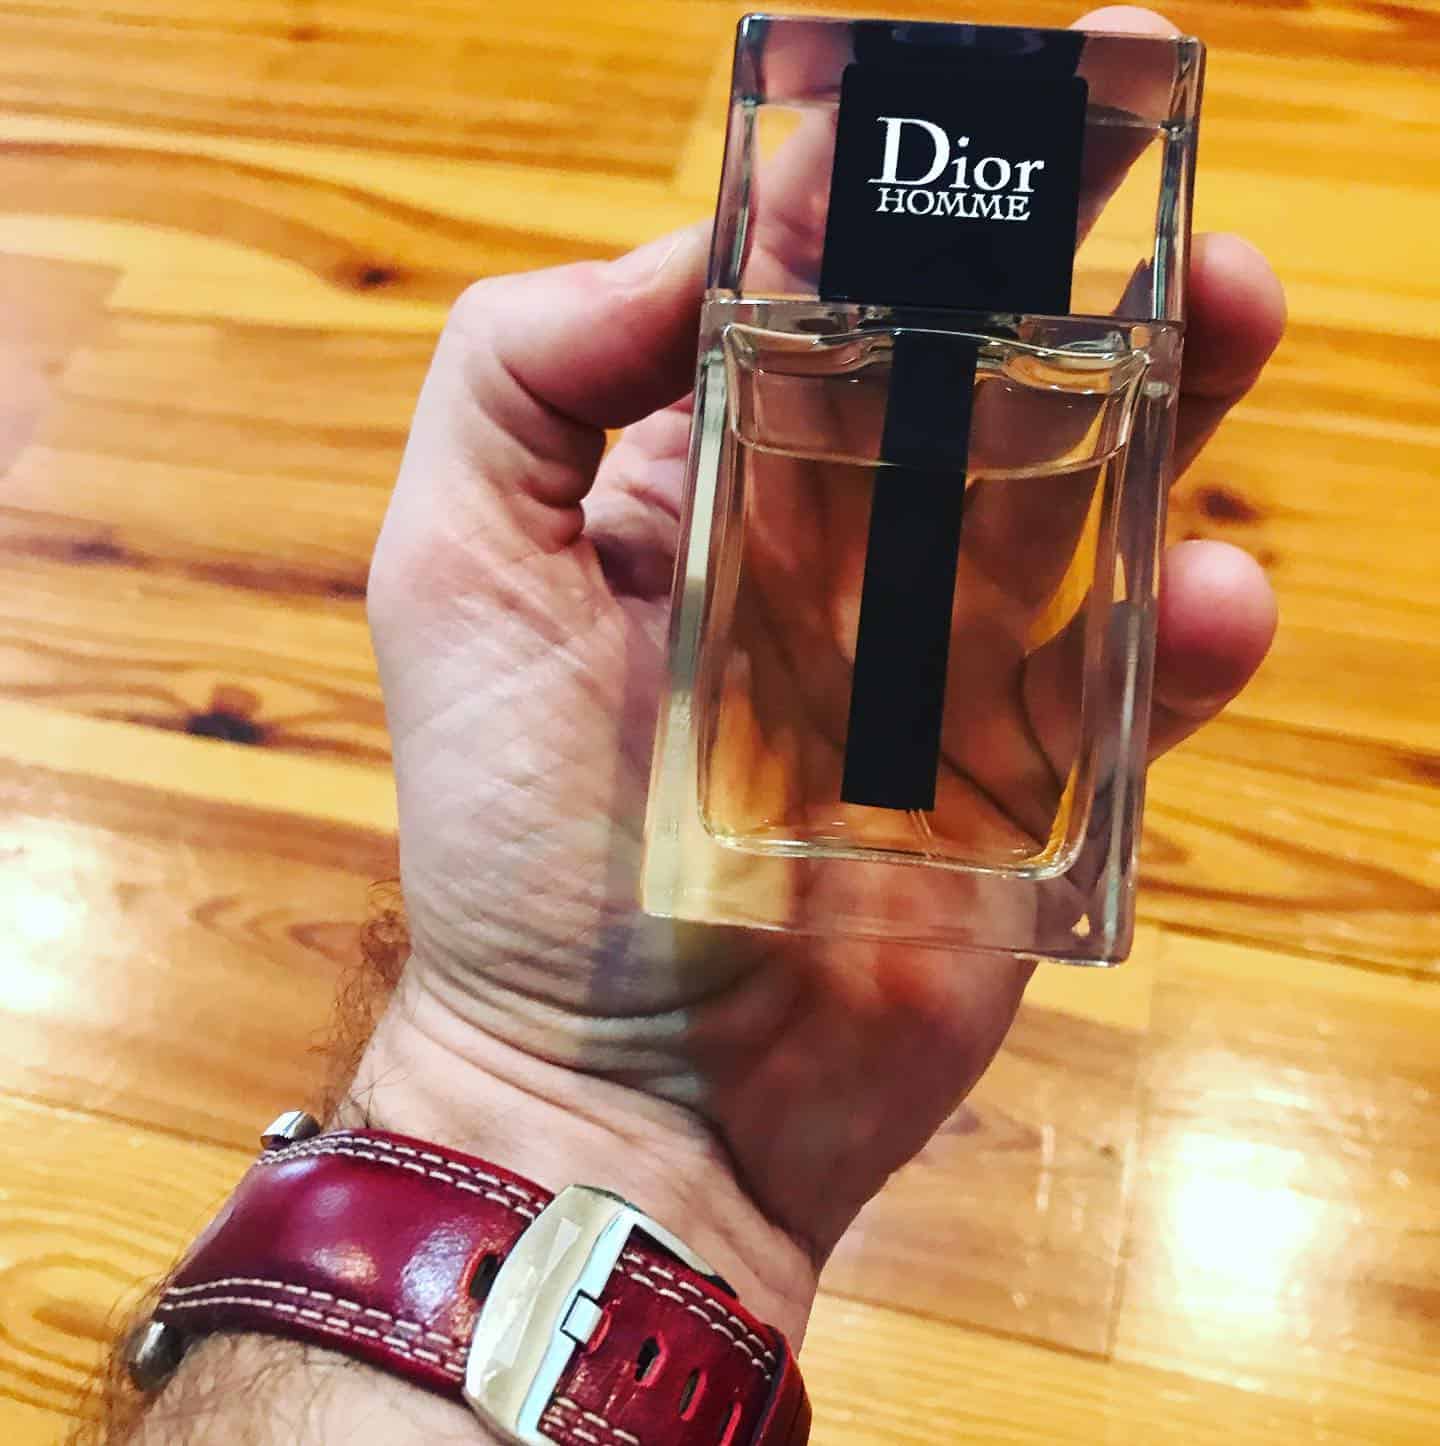 holding a bottle of Dior Homme